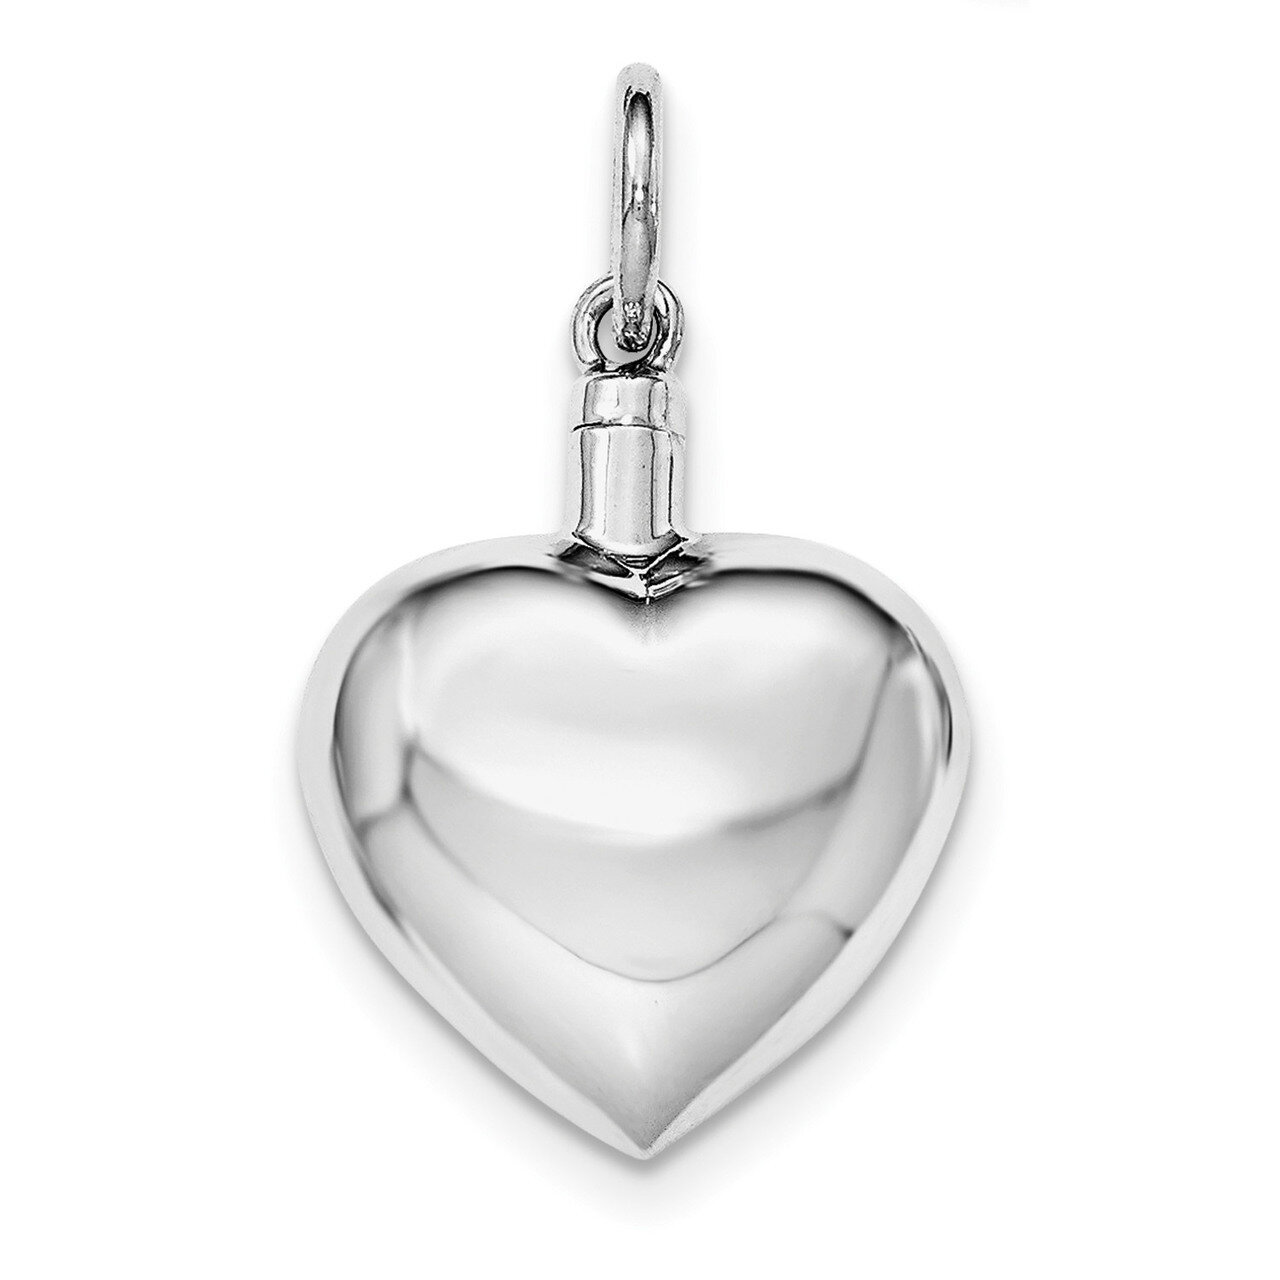 Heart Ash Holder Pendant Sterling Silver Rhodium-plated Polished QC8401